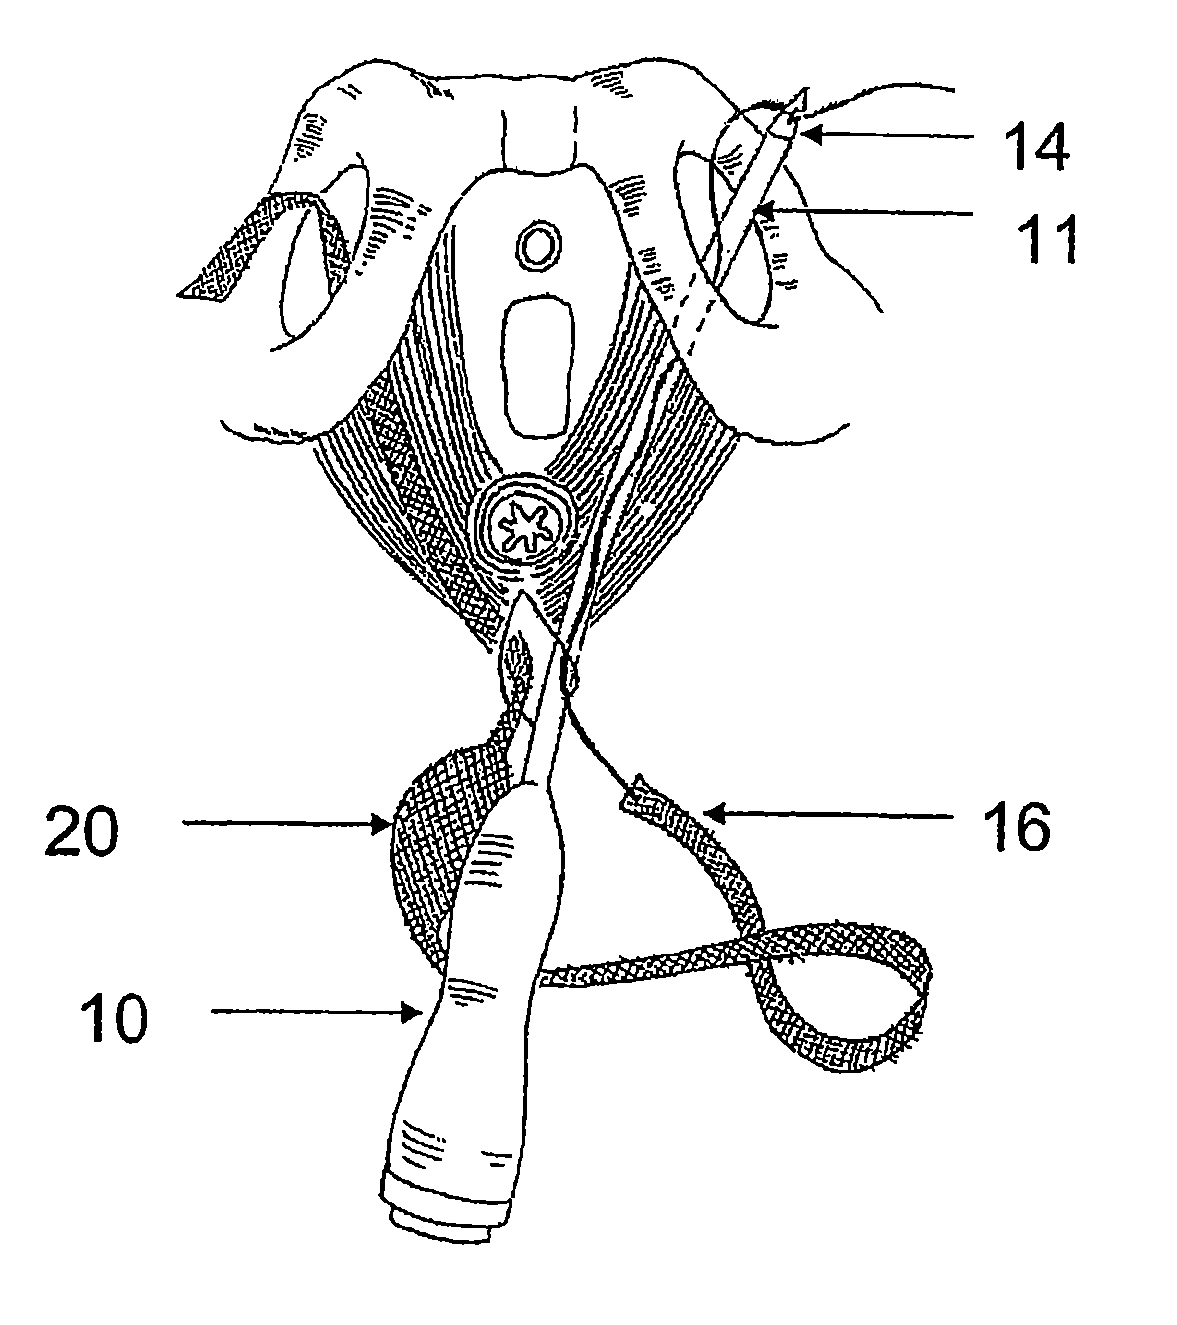 System and Method for Treatment of Anal Incontinence and Pelvic Organ Prolapse